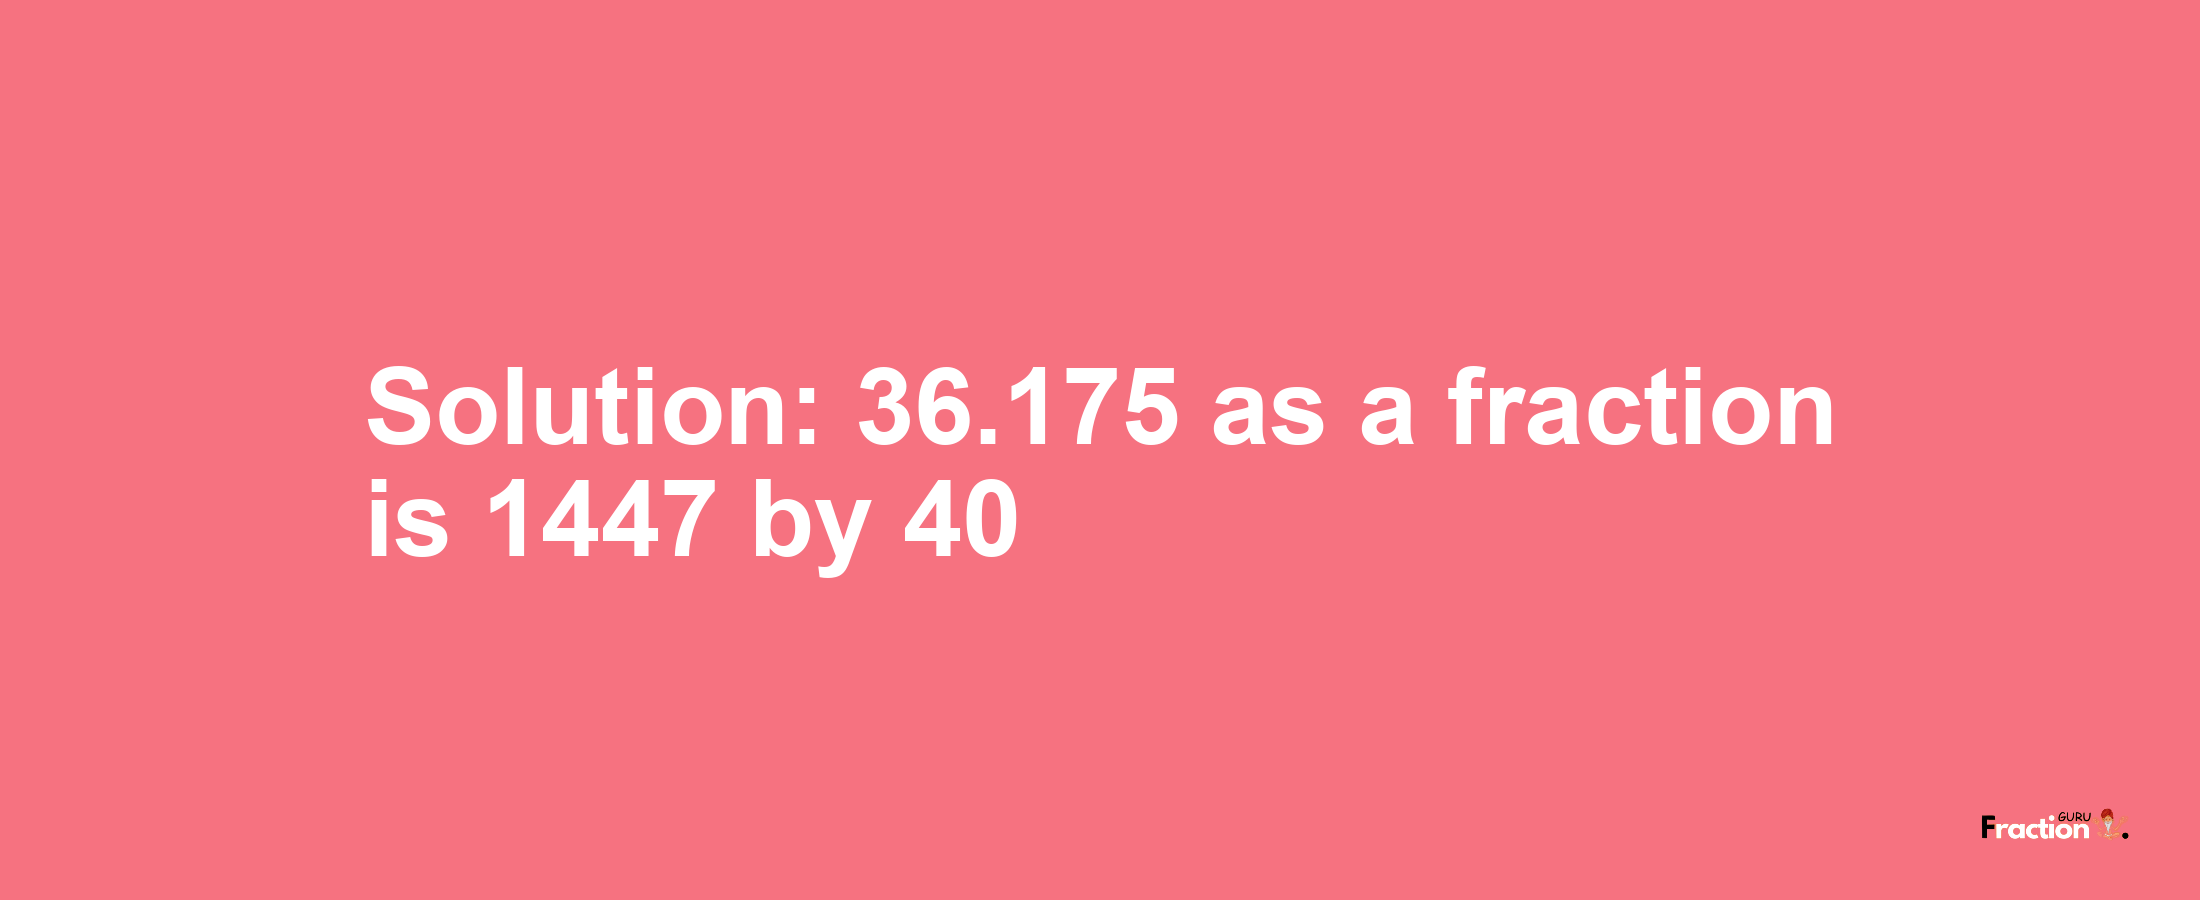 Solution:36.175 as a fraction is 1447/40